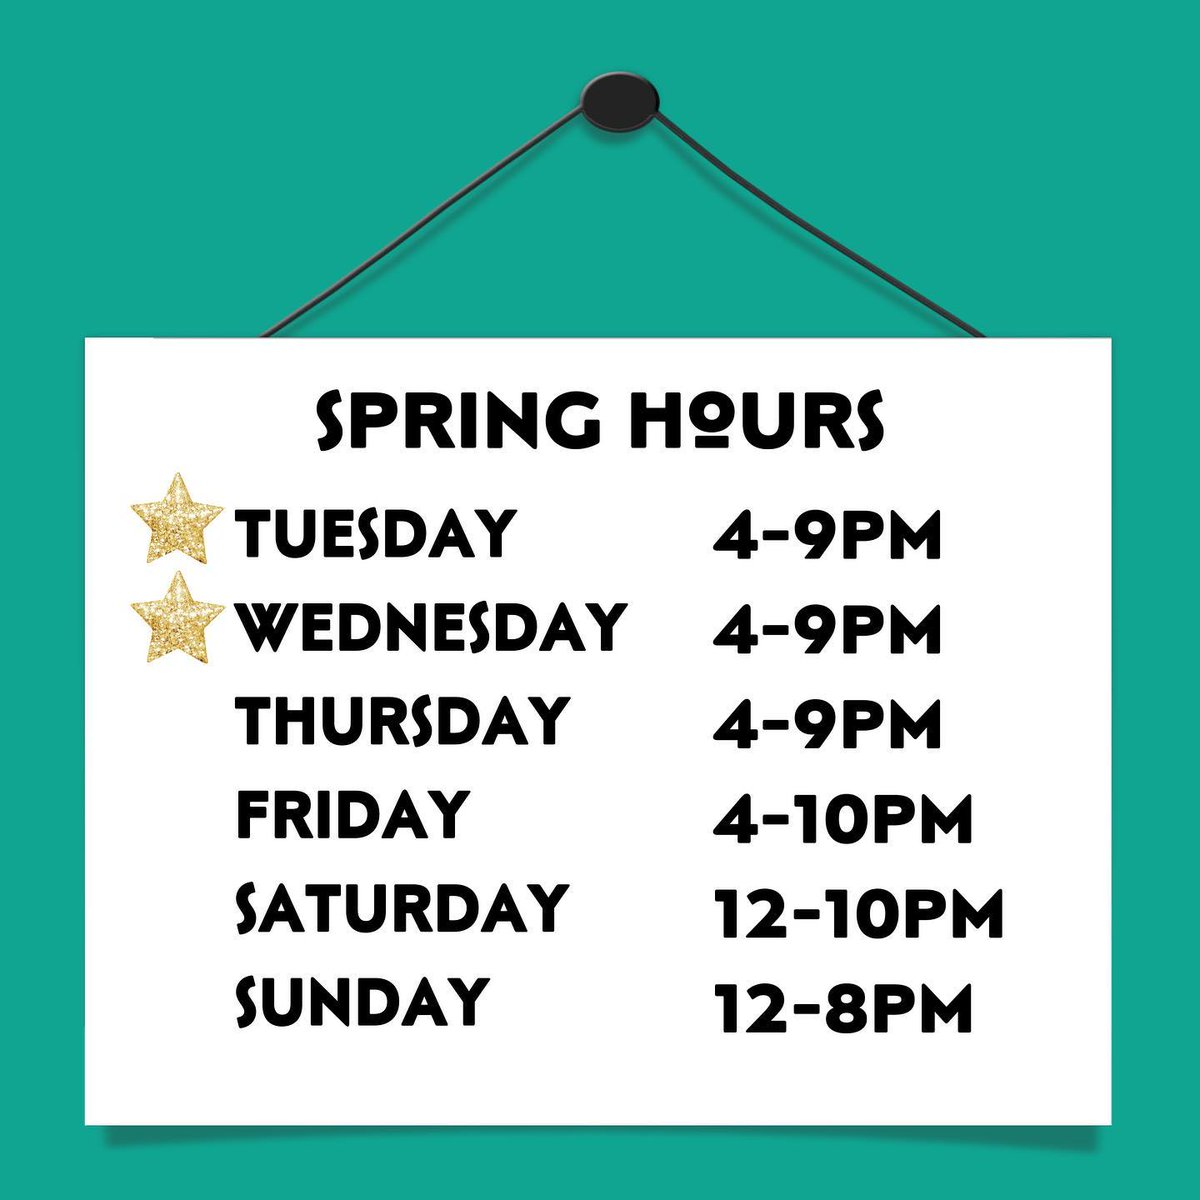 Our spring and summer hours are back!! 😍
We are back open on Tuesdays and Wednesdays beginning today!! And open later on Sundays.

#taphouse #beergarden #downtownloveland #fun #friends #livemusic #northerncolorado #wine #CraftBeer #hardcider #hardseltzer #socialgathering